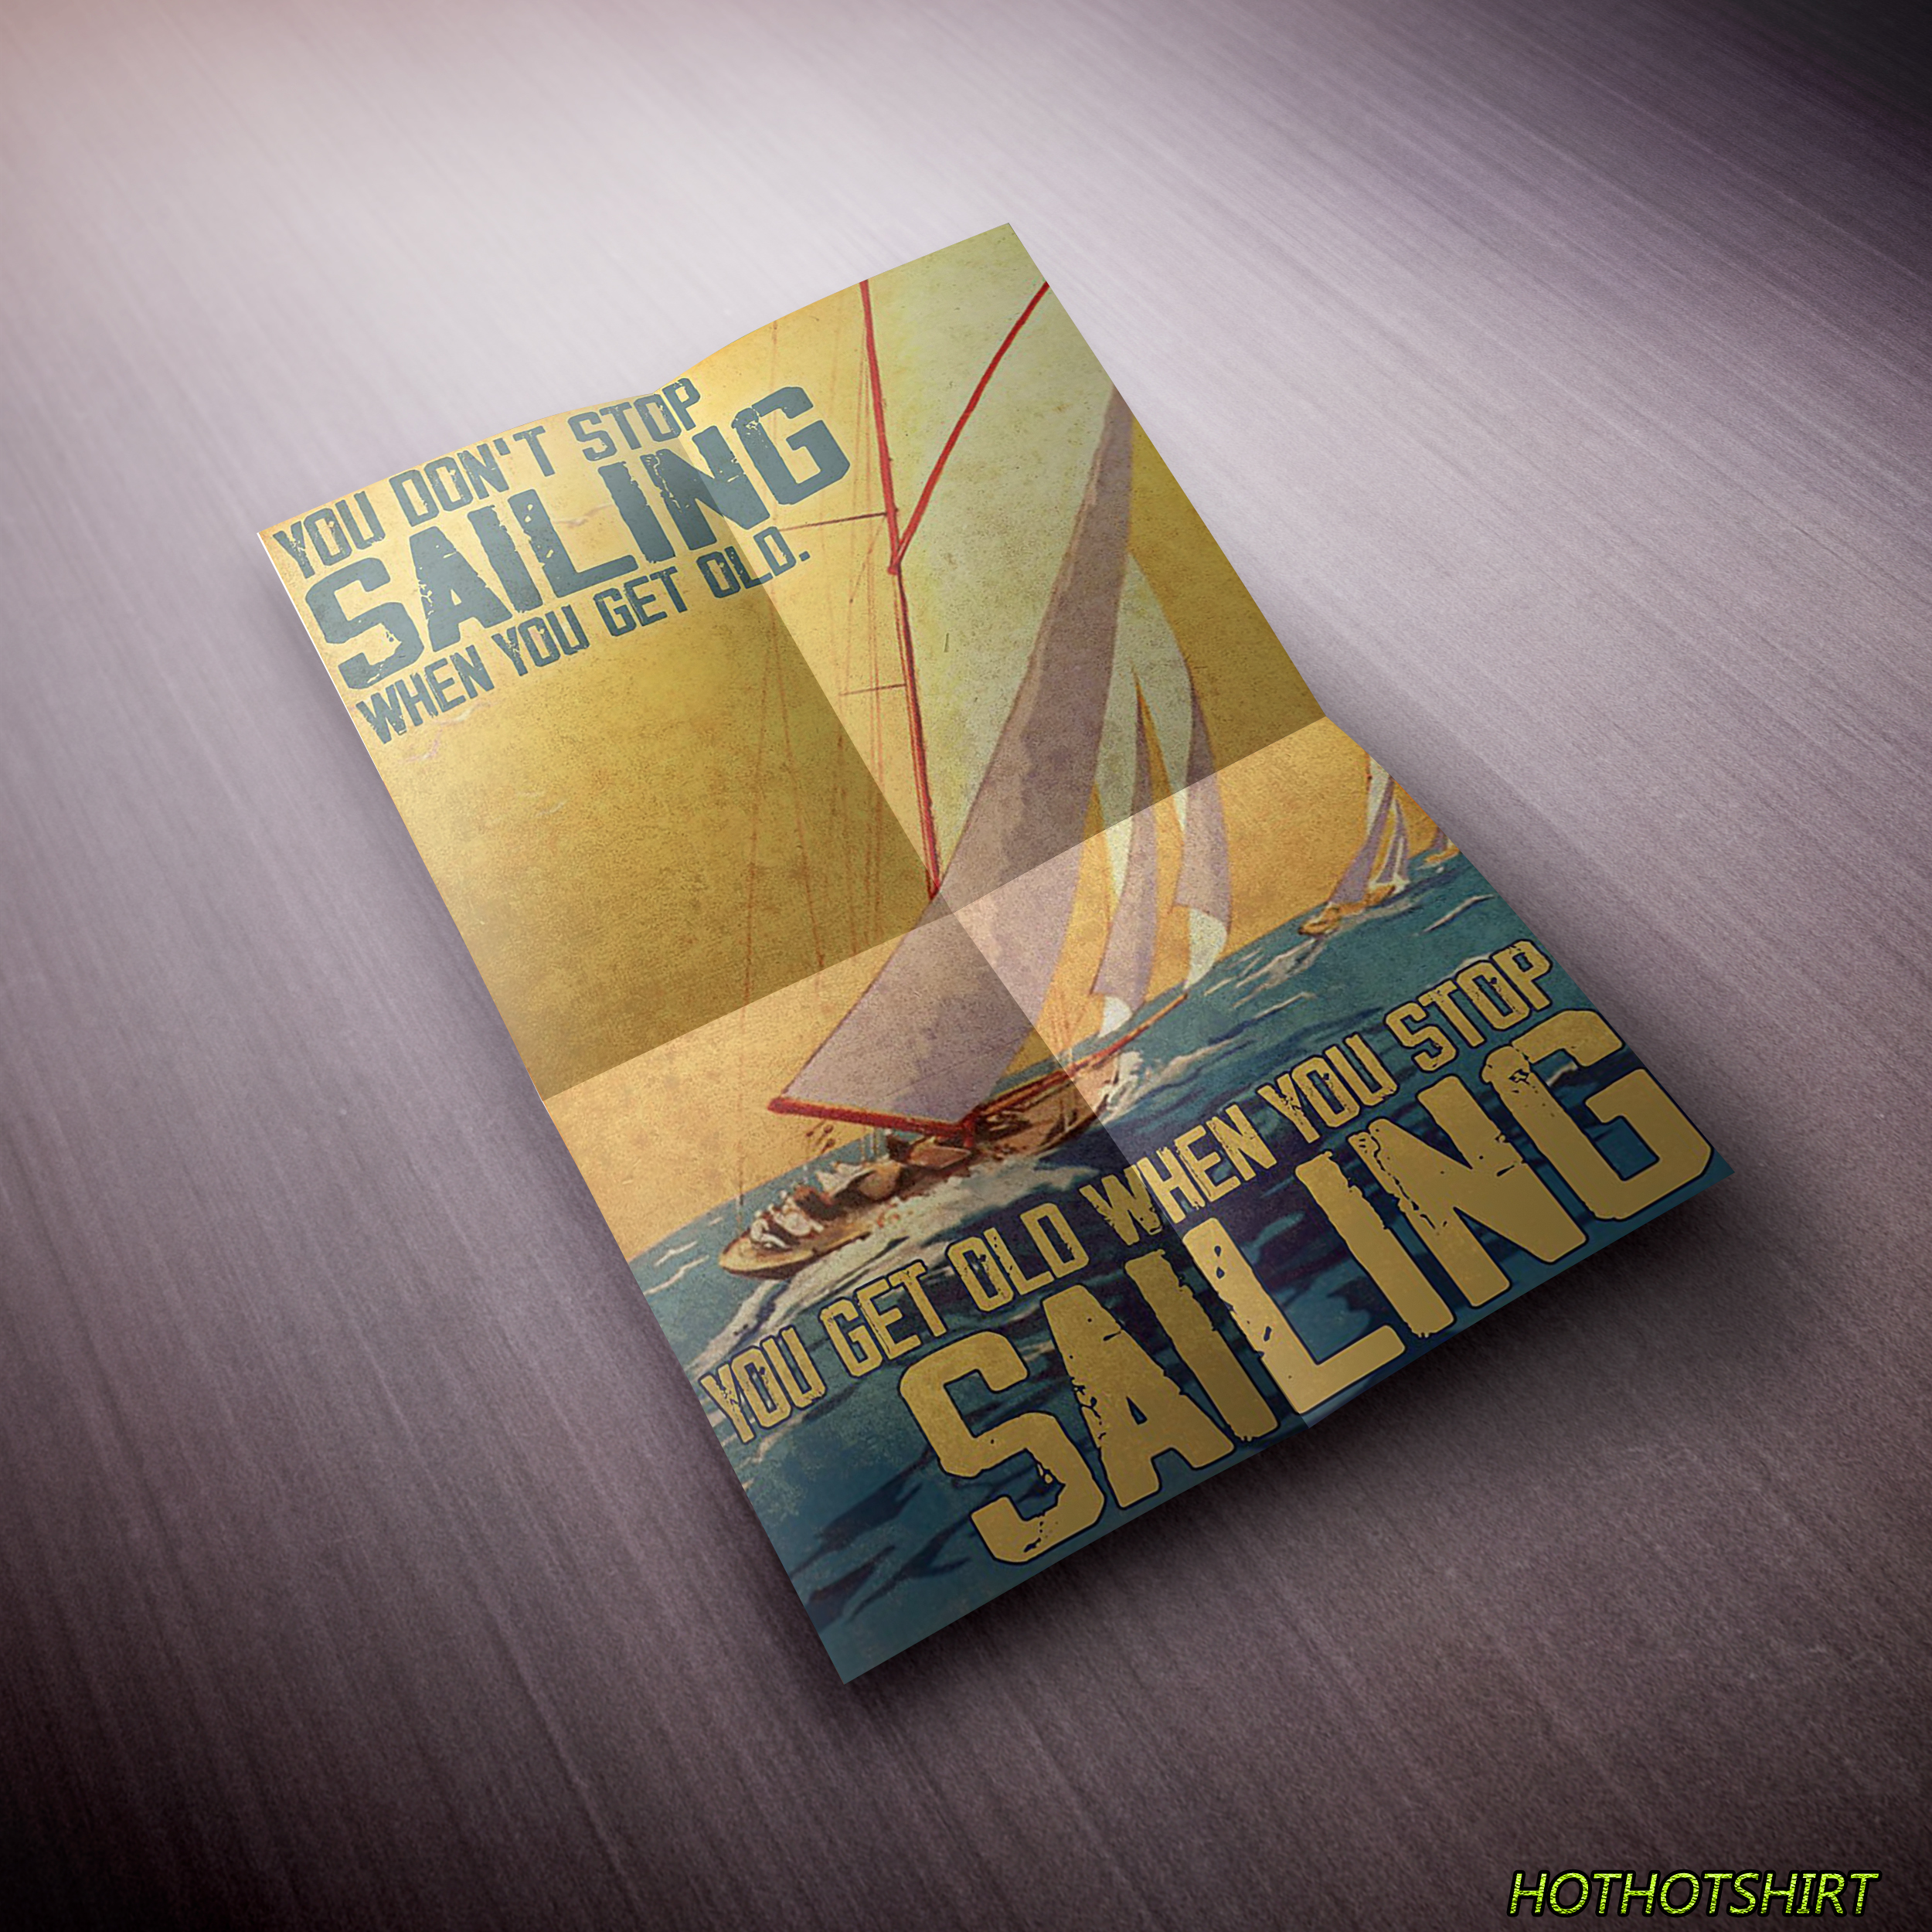 You don't stop sailing when you get old you get old when you stop sailing poster